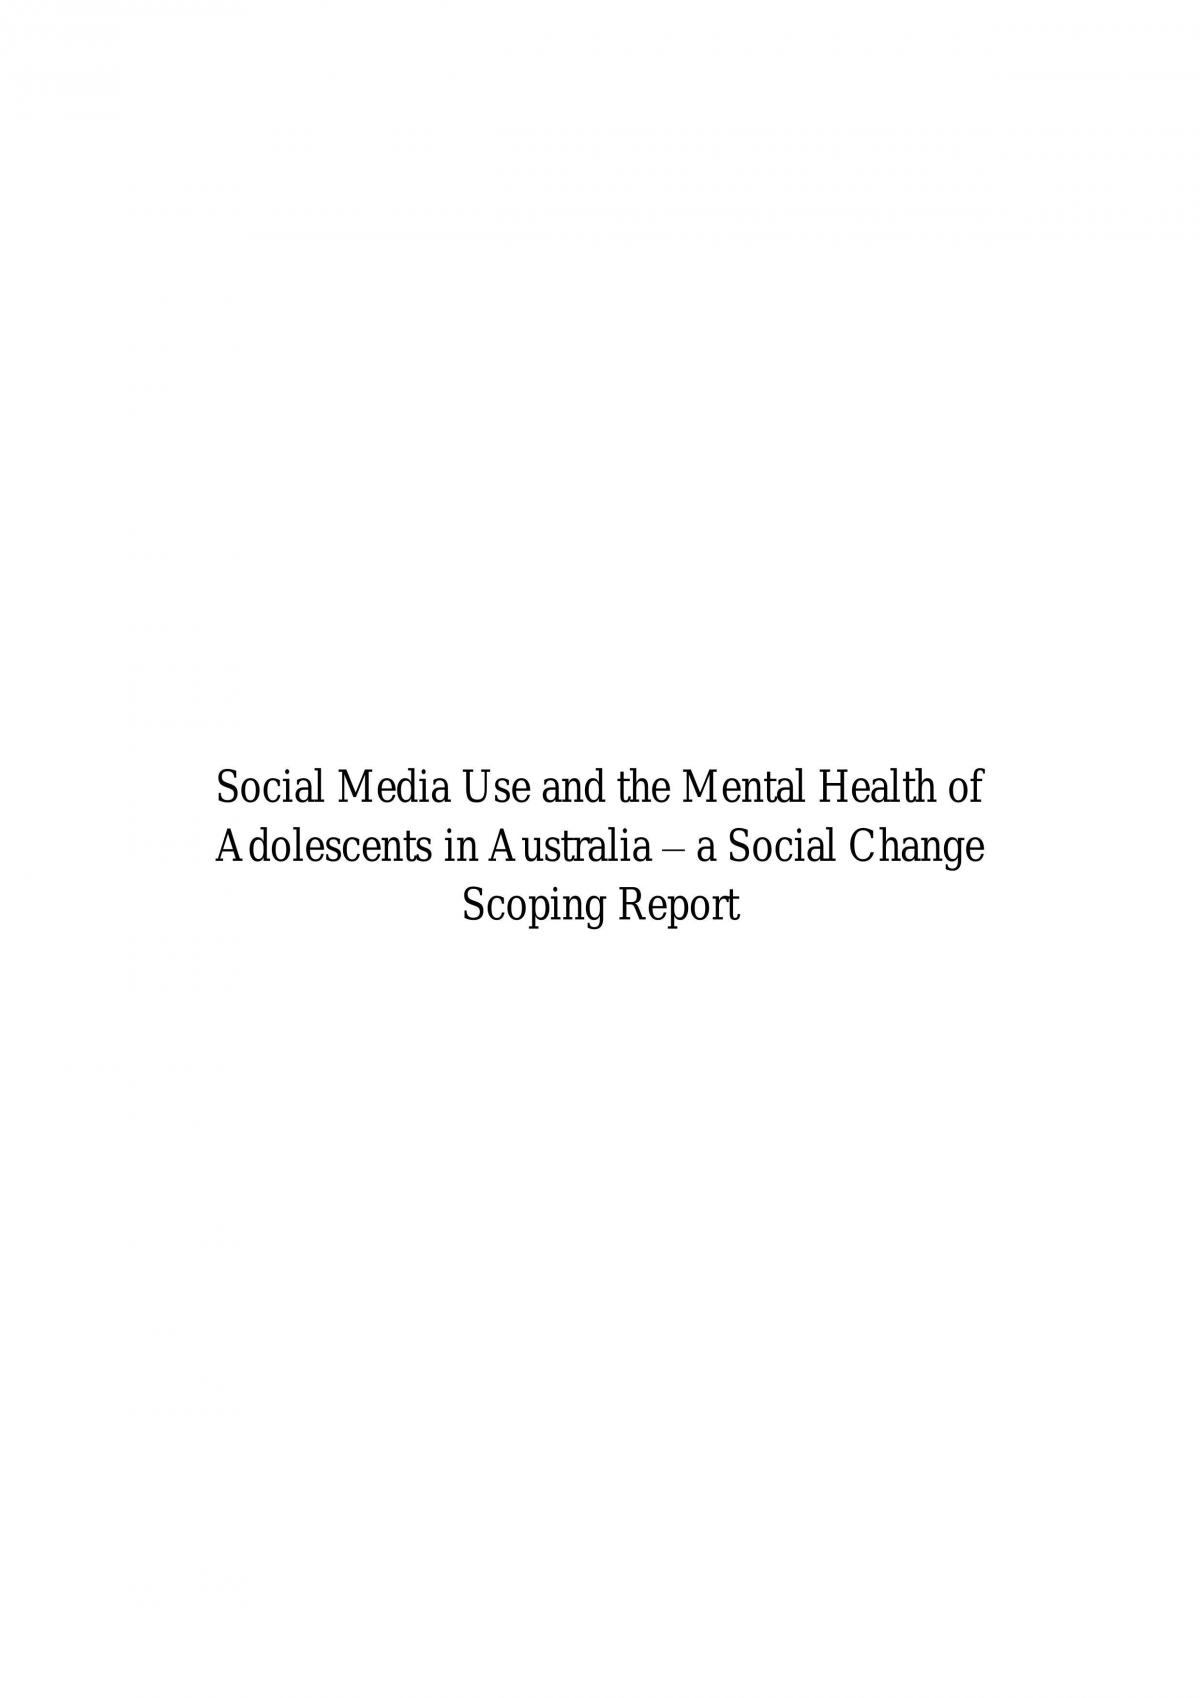 Social Change Scoping Report - Page 1